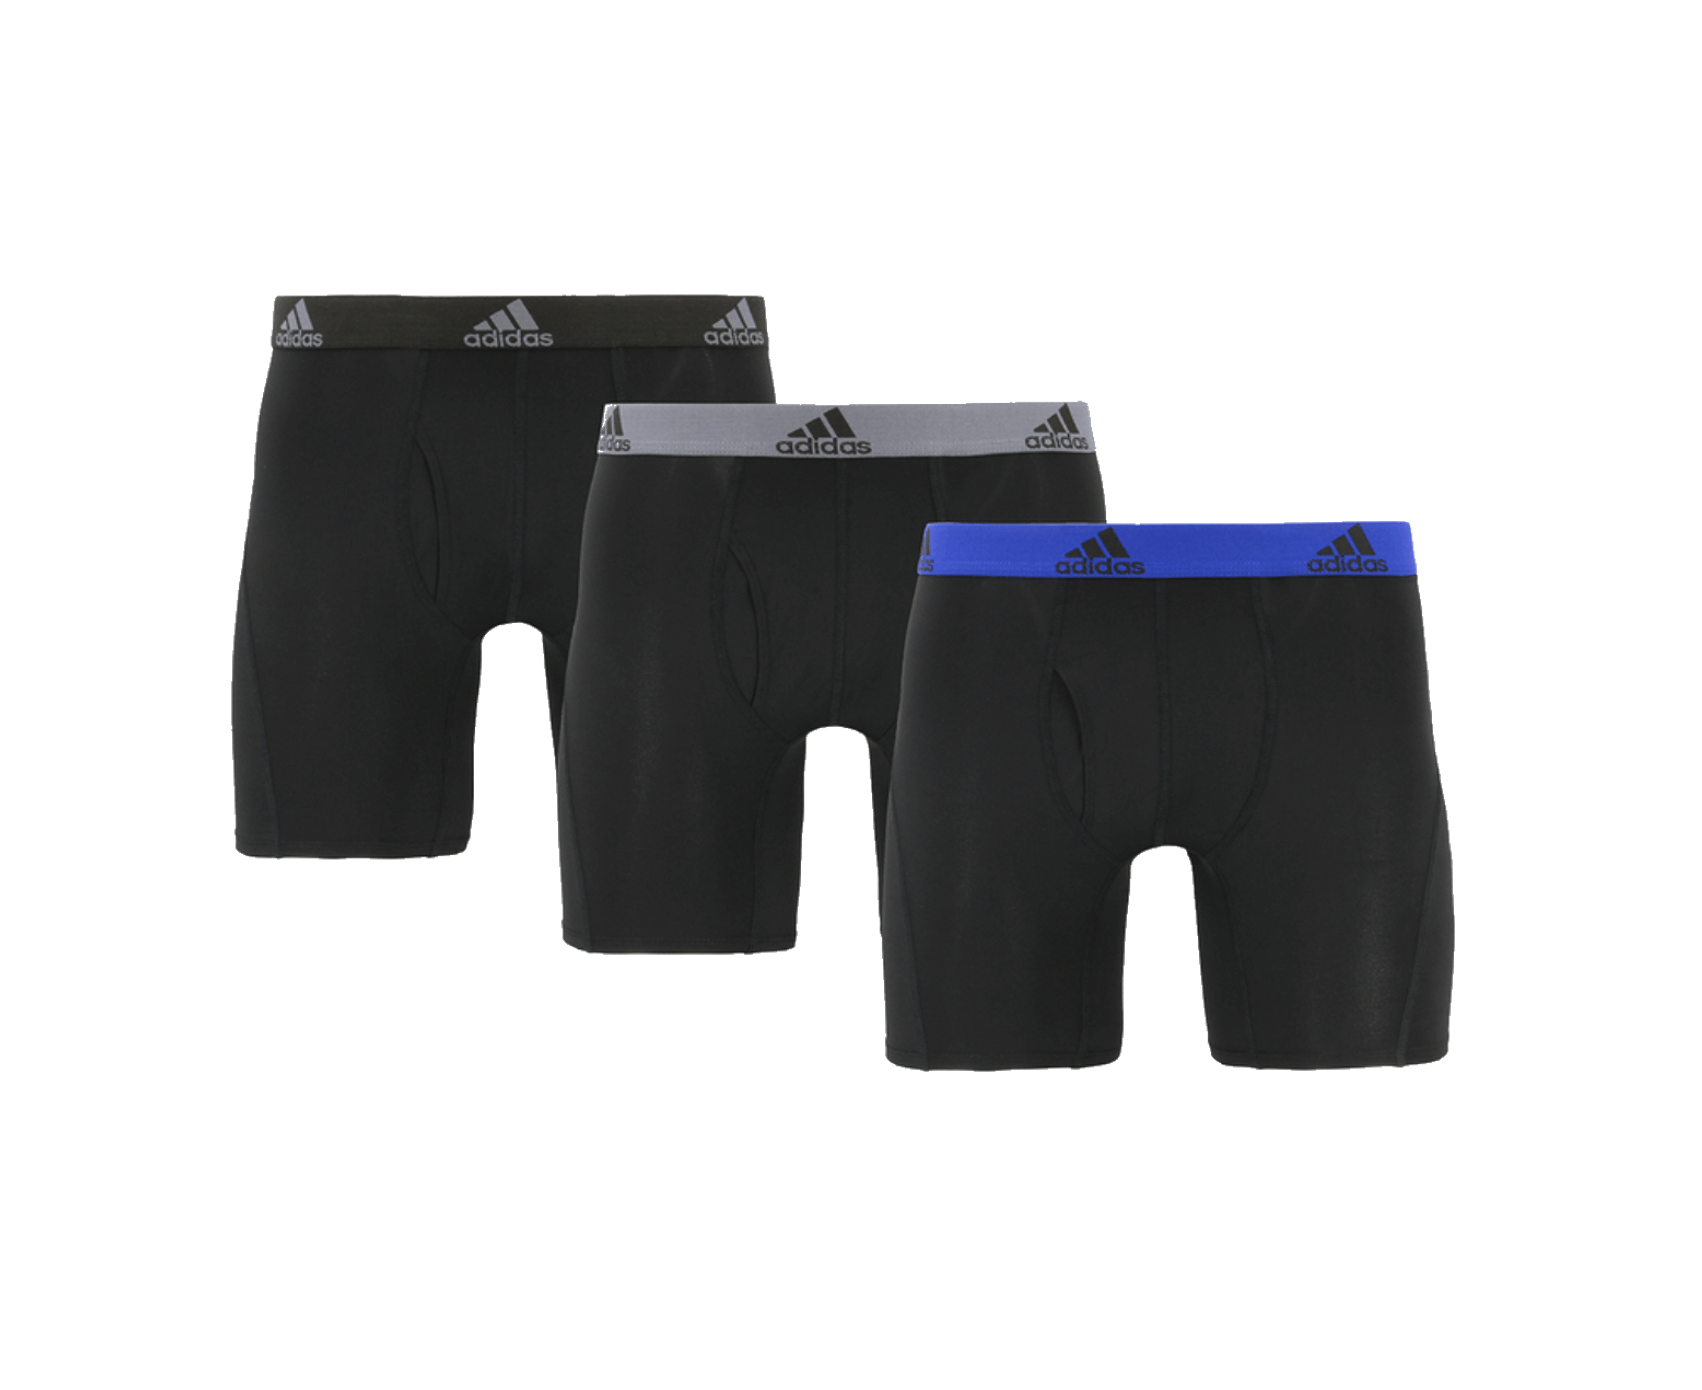 adidas Climalite Relaxed Boxer Brief Underwear 3 Pack - Black